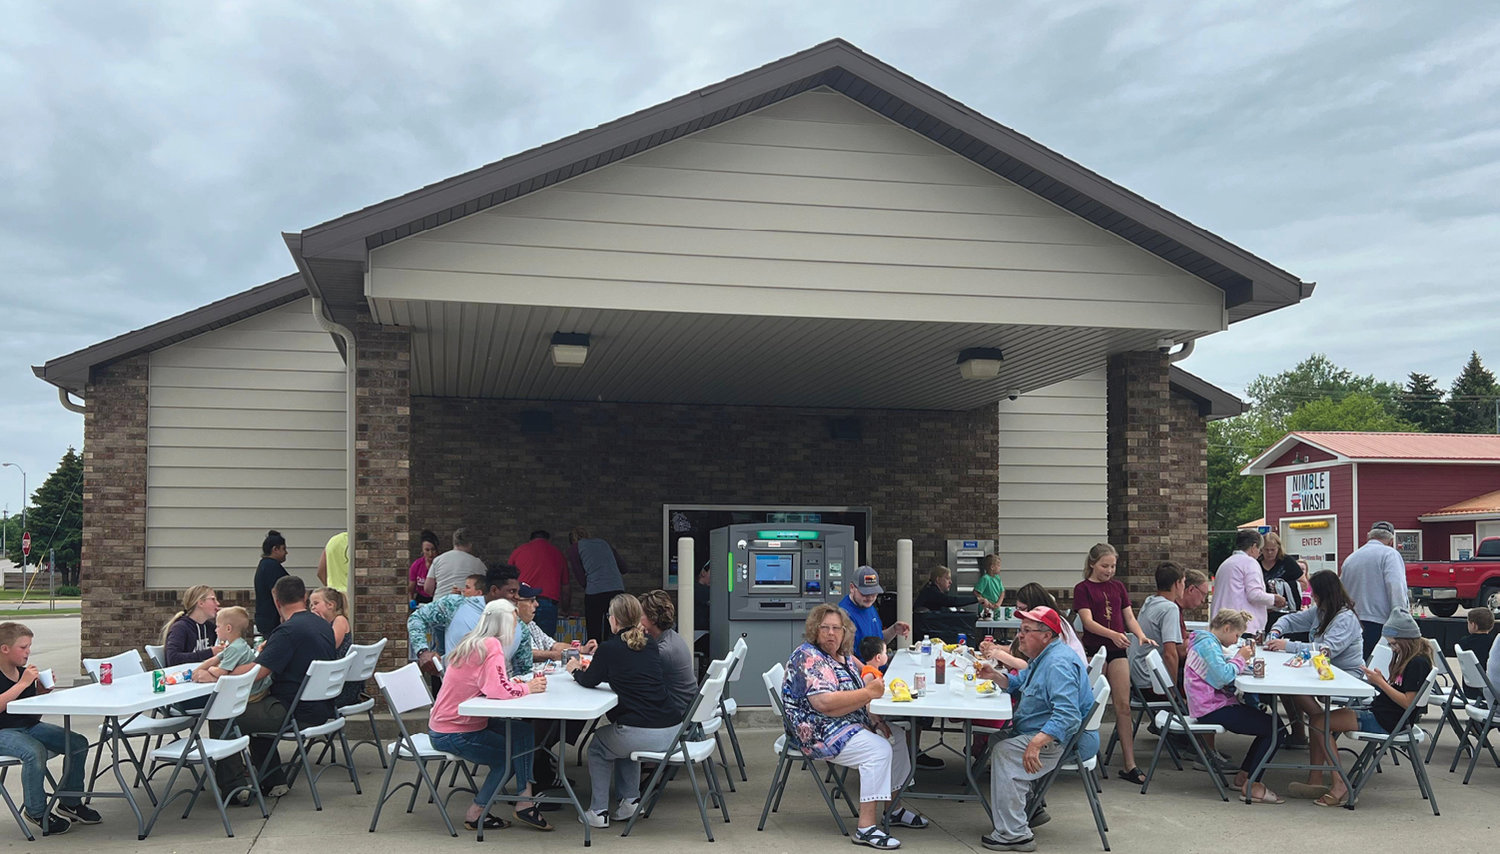 Dakotaland FCU held their annual Dakotaland Memberfest last Thursday. It was a beautiful night for people to gather and have a picnic outside.